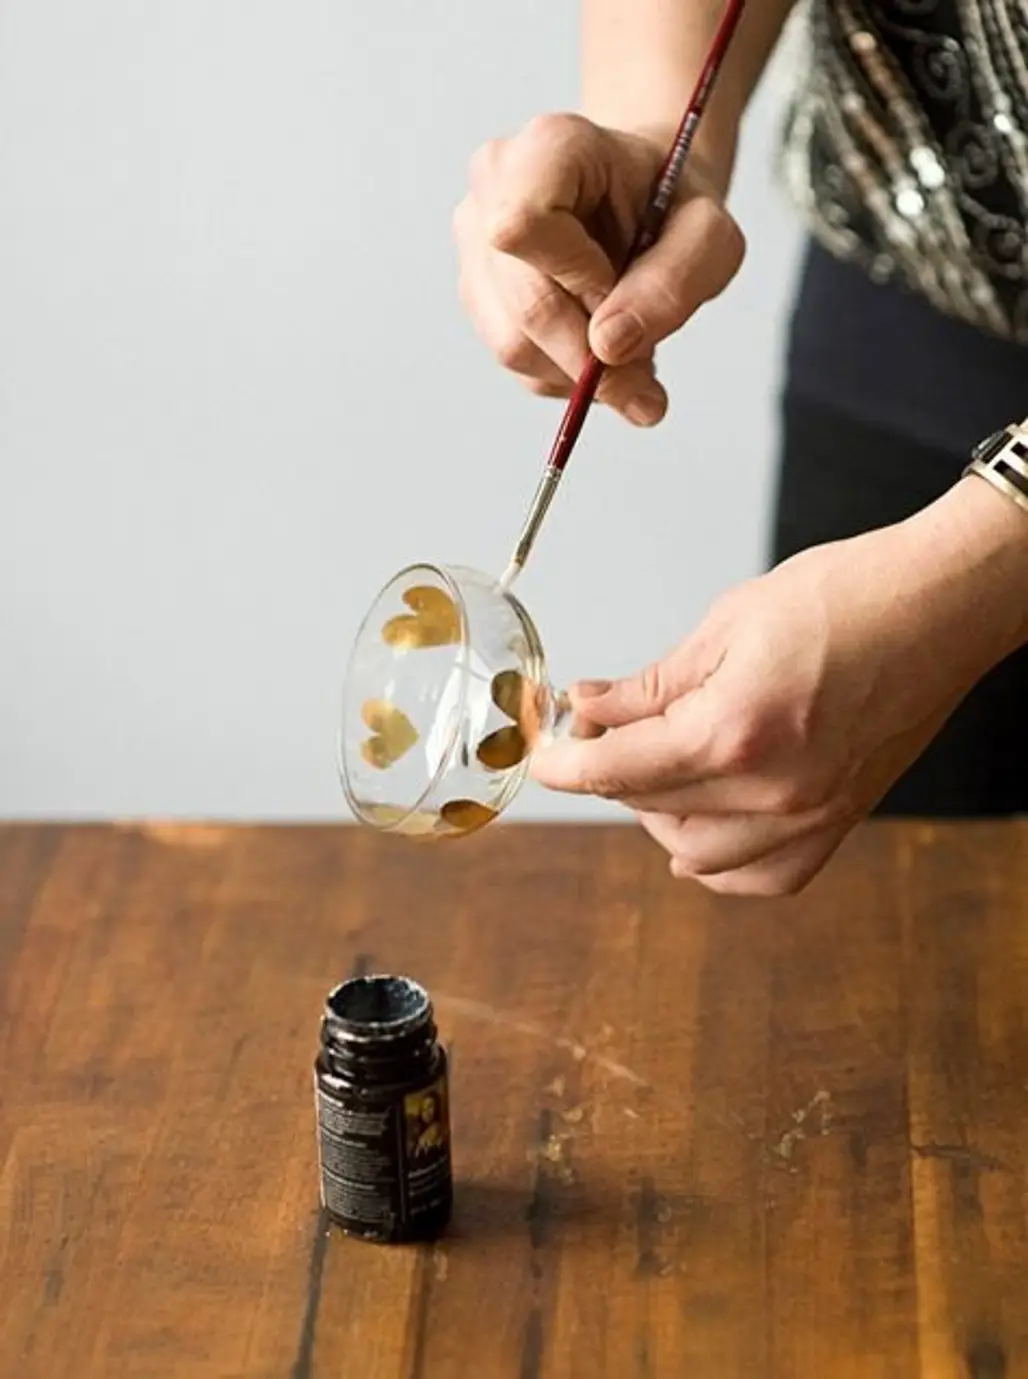 Learn How to Gold Leaf Glasses